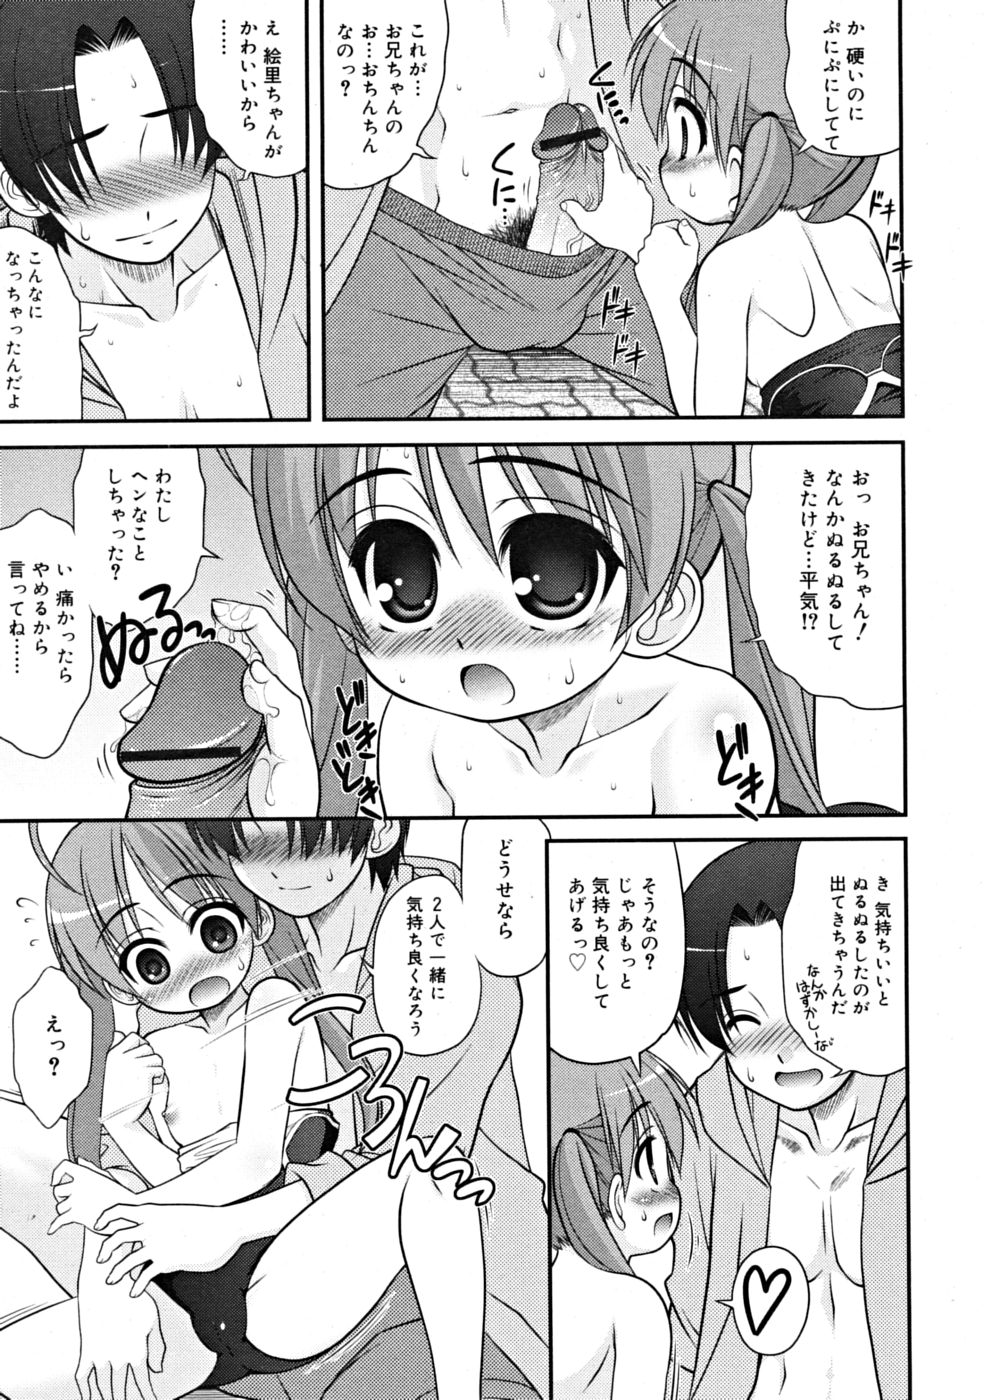 COMIC RiN 2008-09 page 35 full